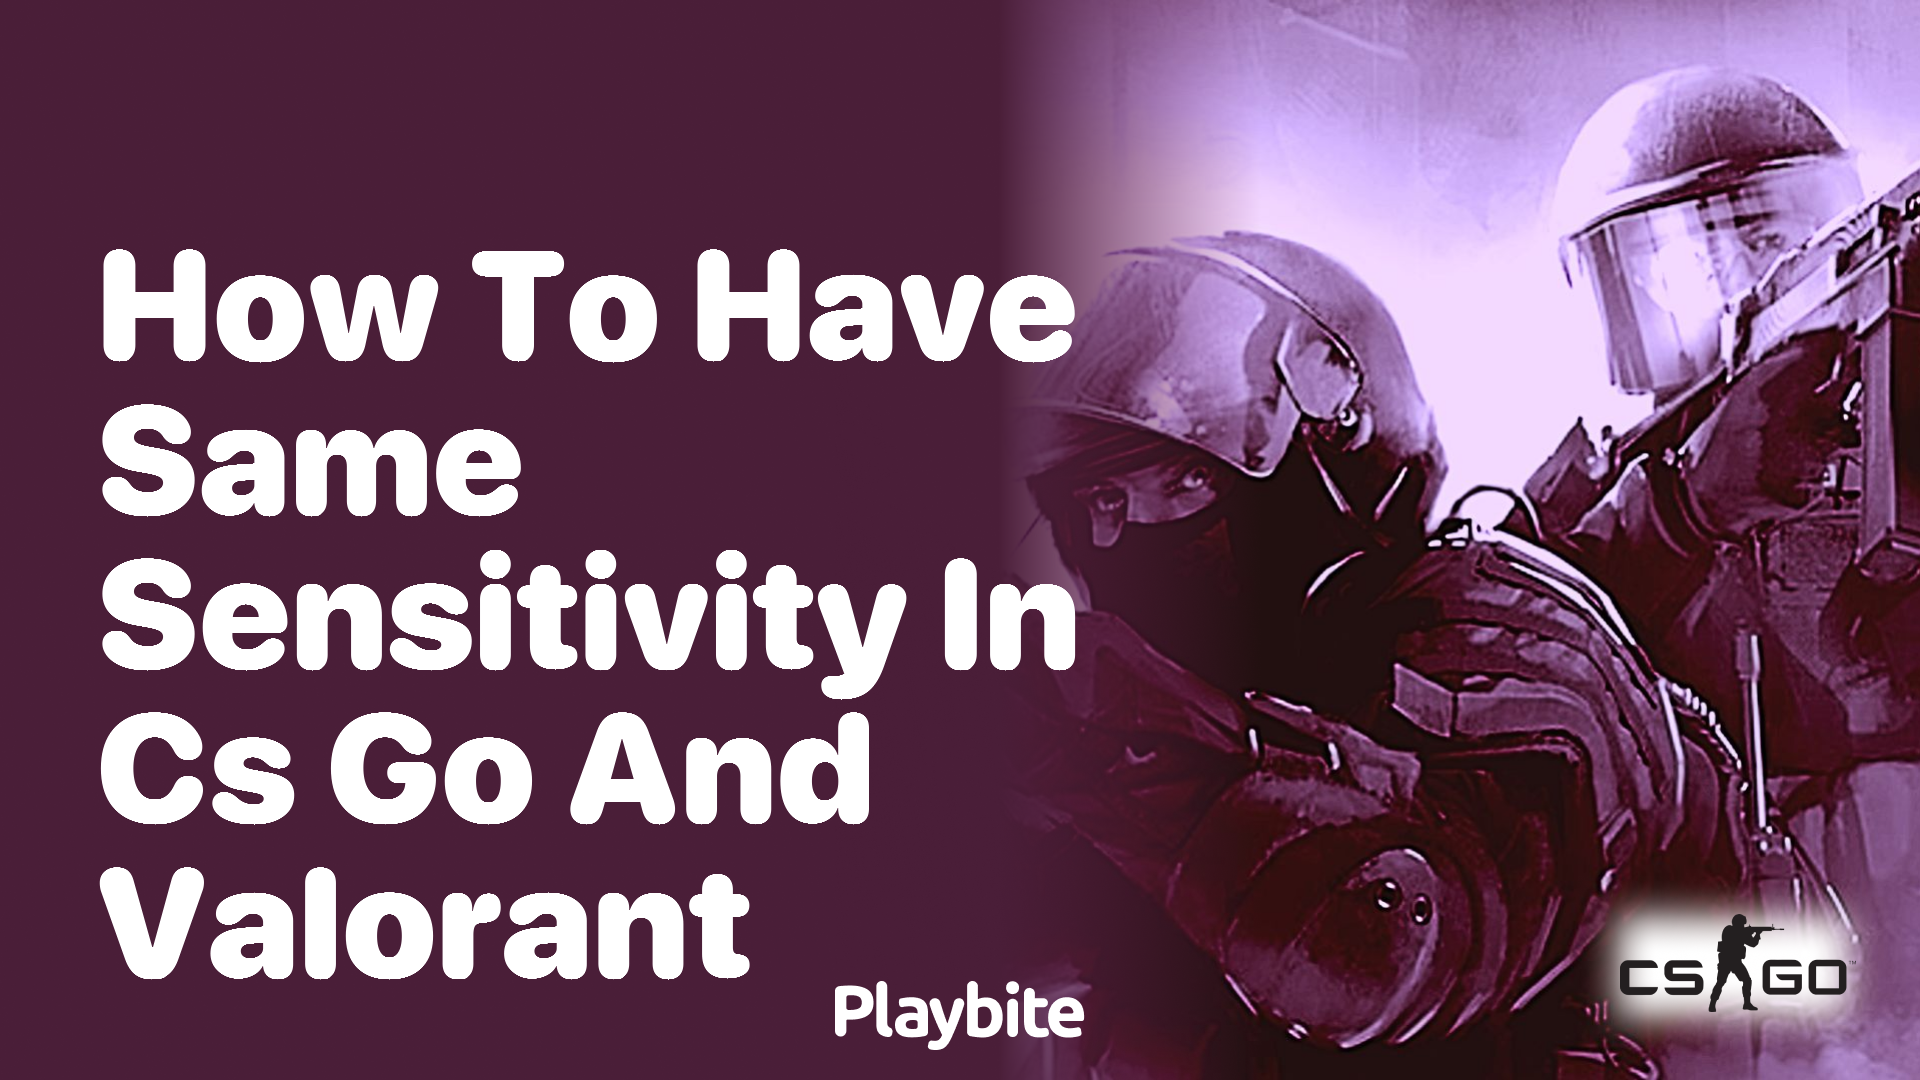 How to have the same sensitivity in CS:GO and Valorant